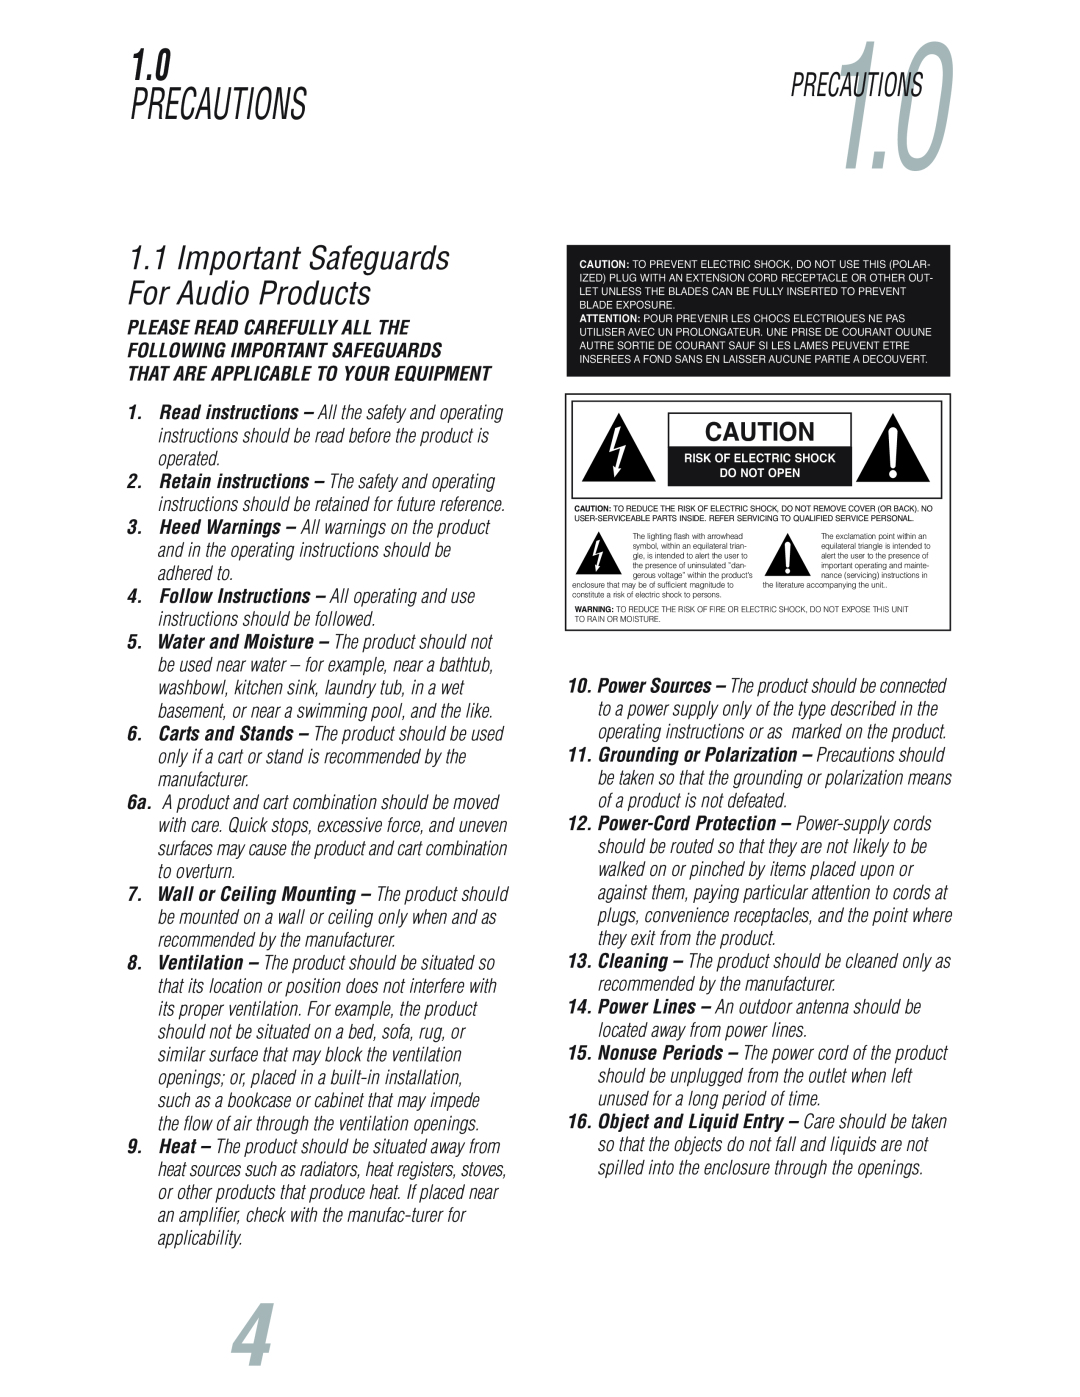 JBL S7150 user manual Precautions, PRECAUTIONS1.0, 1.1Important Safeguards For Audio Products 